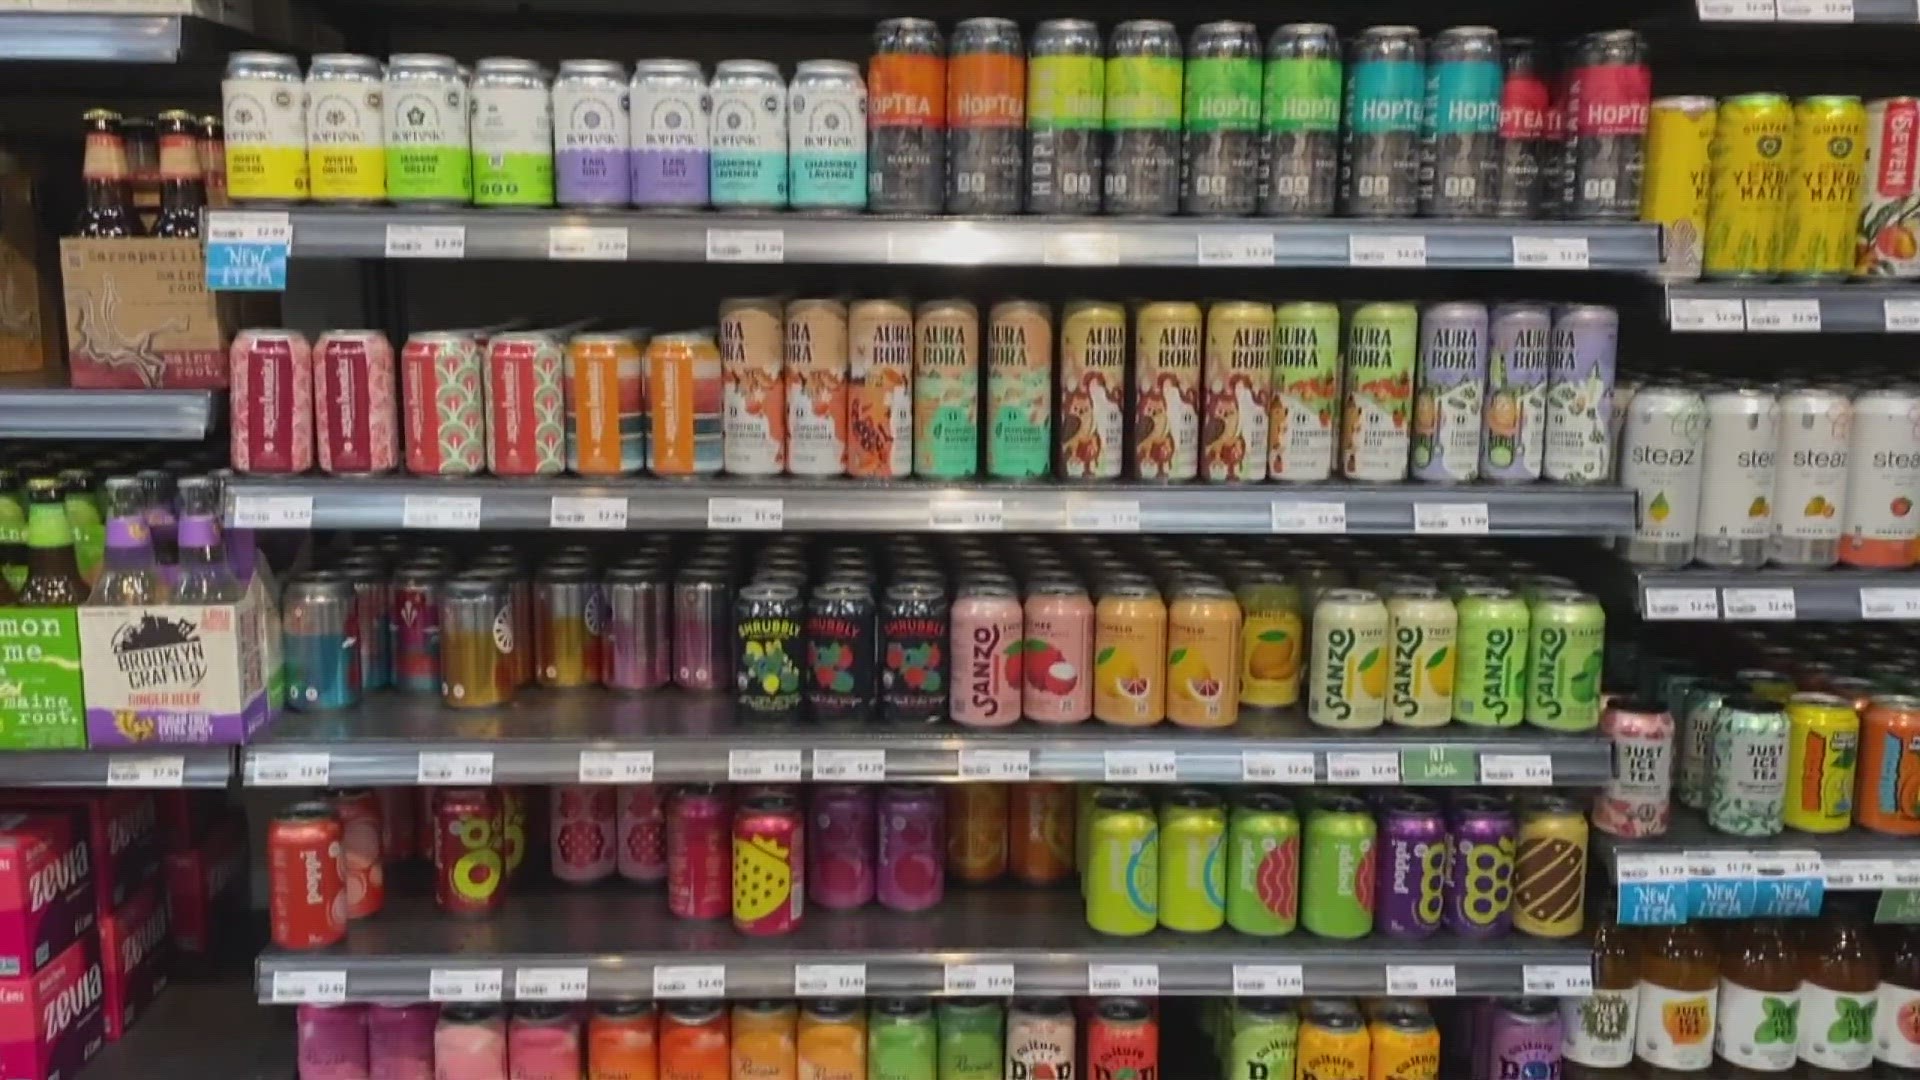 From probiotic sodas and natural energy drinks to green juices, a lot of "functional" drinks claim to be good for you. Consumer Reports looks into the health claims.